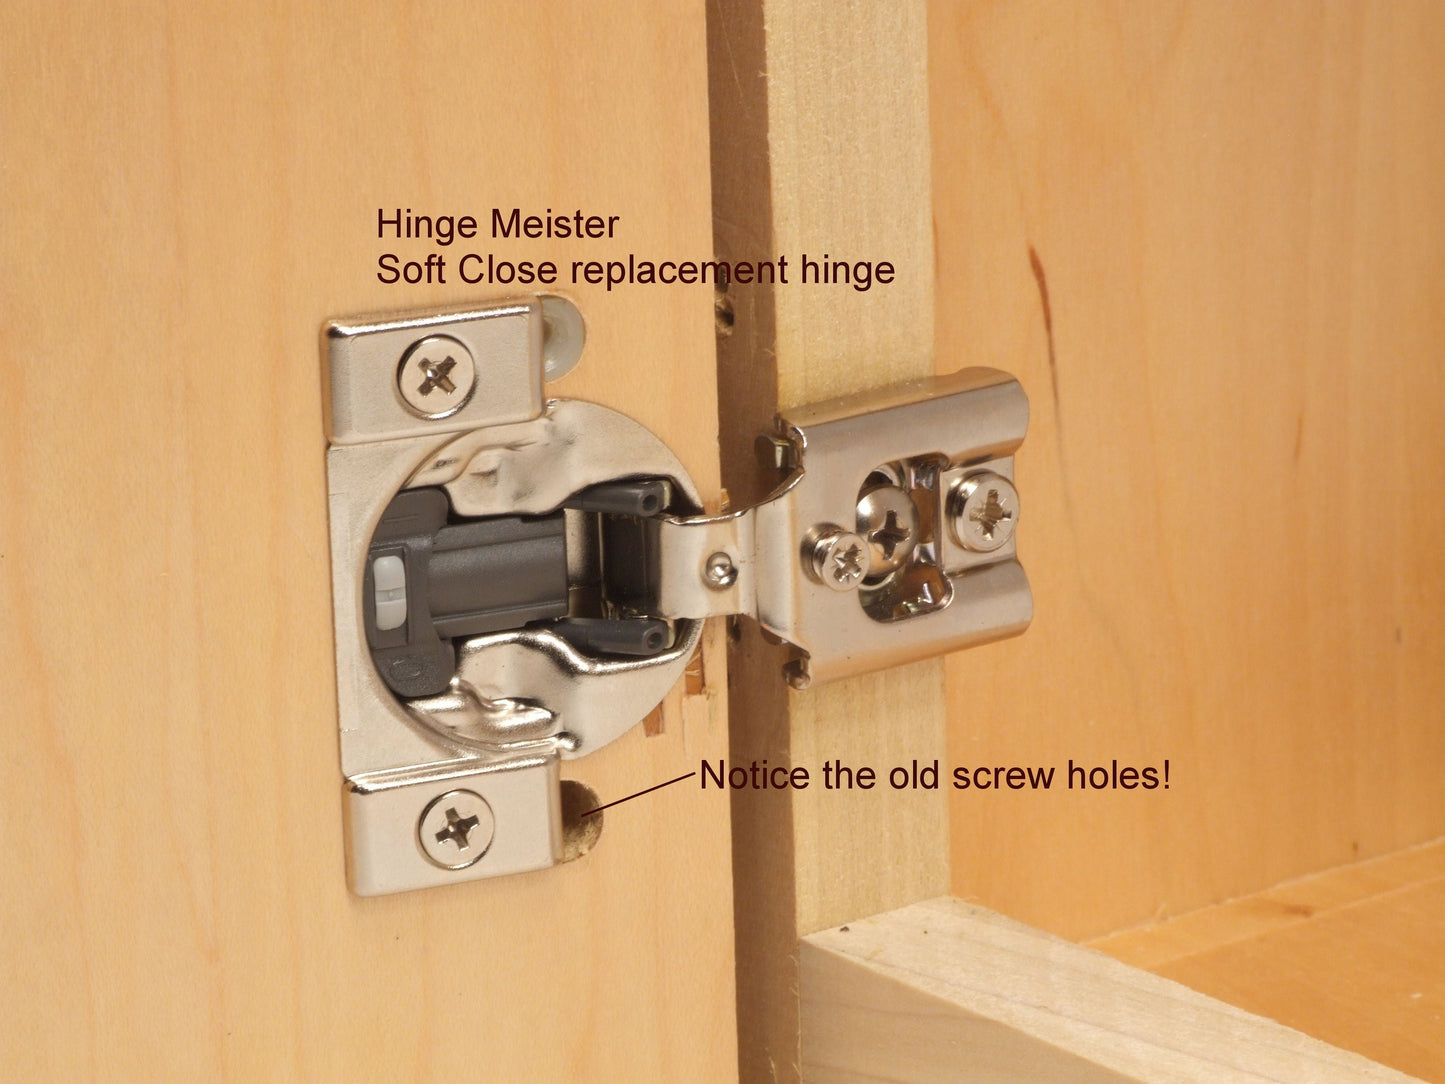 Grass 830-41 Soft Close Replacement Hinges - Sold as PAIRS!